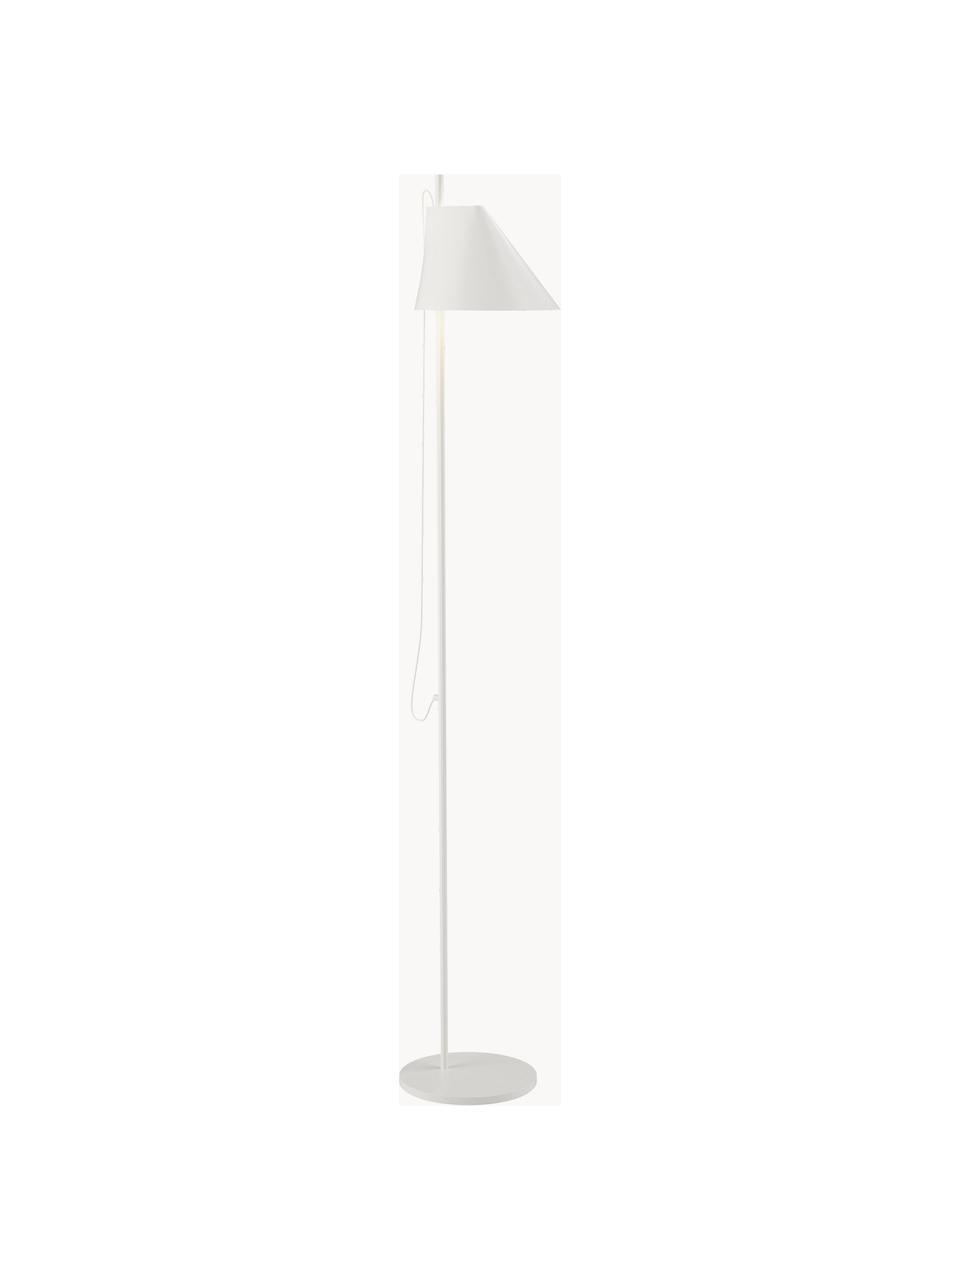 Dimmbare LED-Stehlampe Yuh mit Timerfunktion, Weiß, H 140 cm